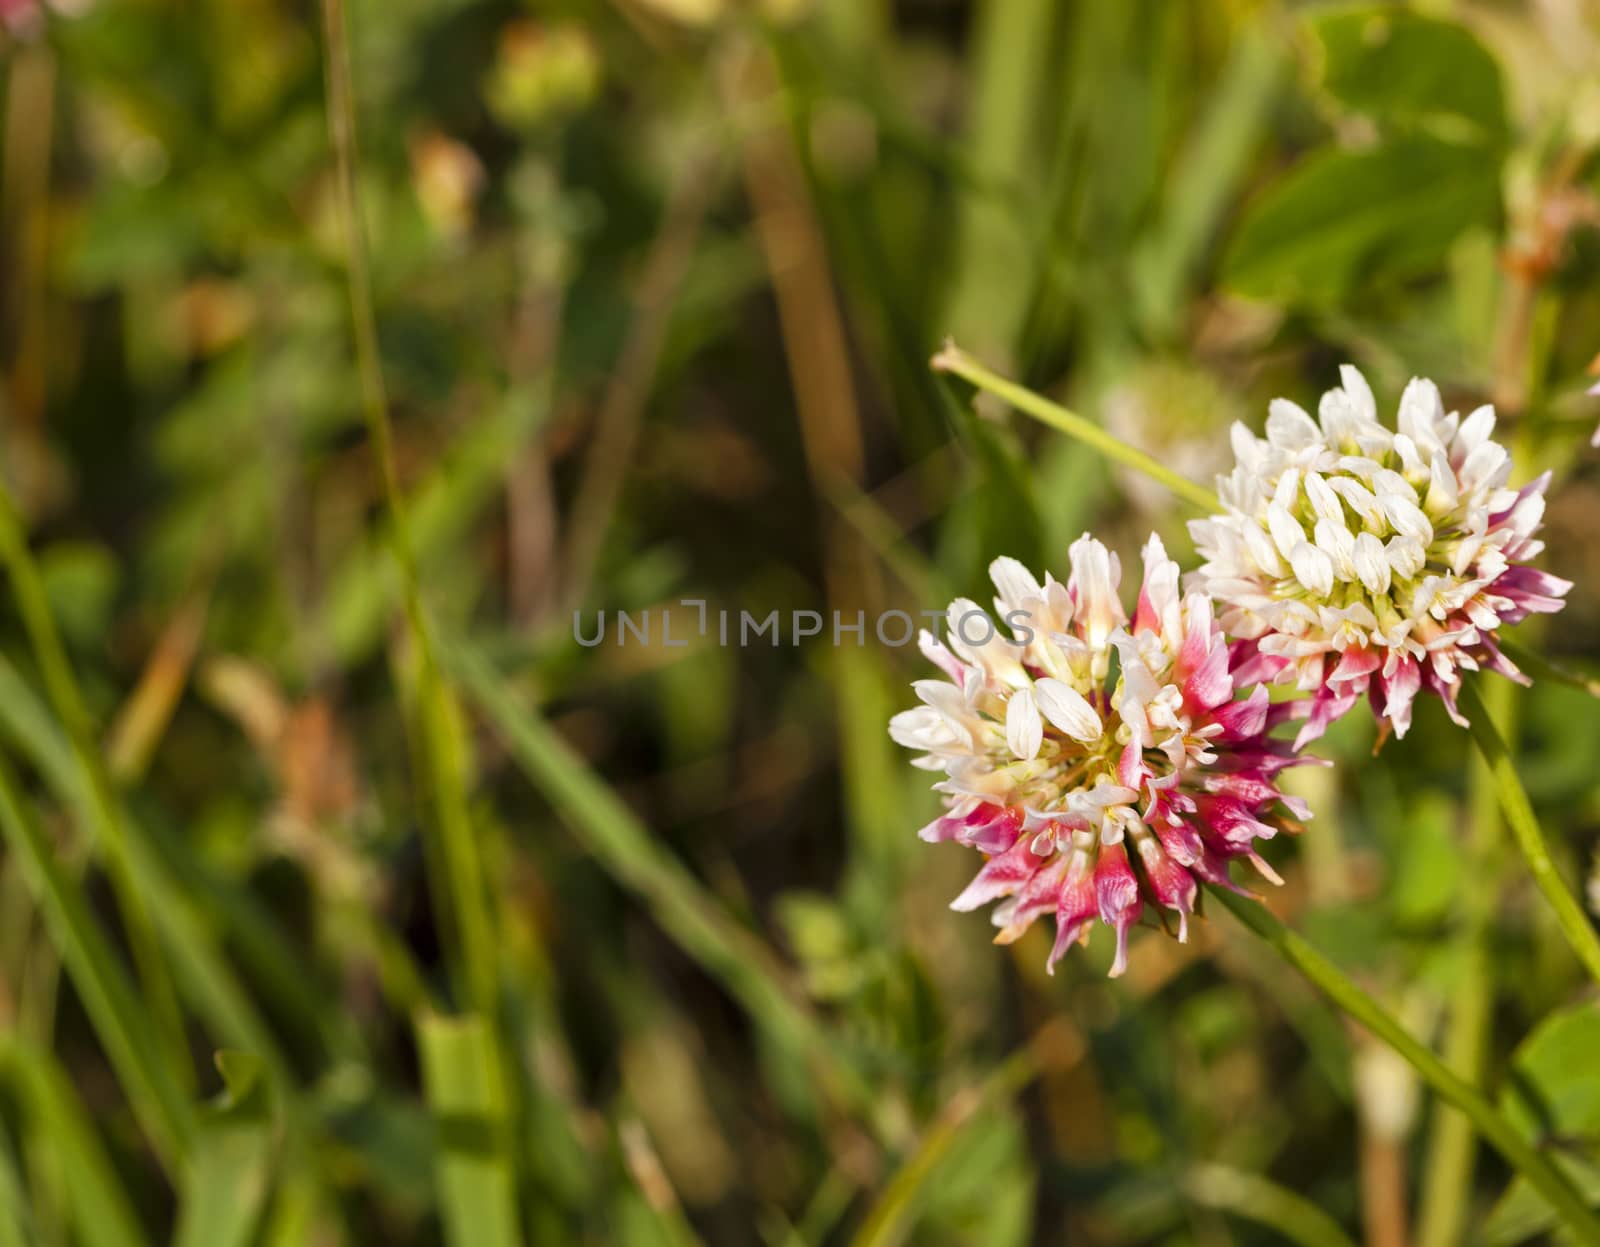   the flowers of a clover photographed by a close up. spring season